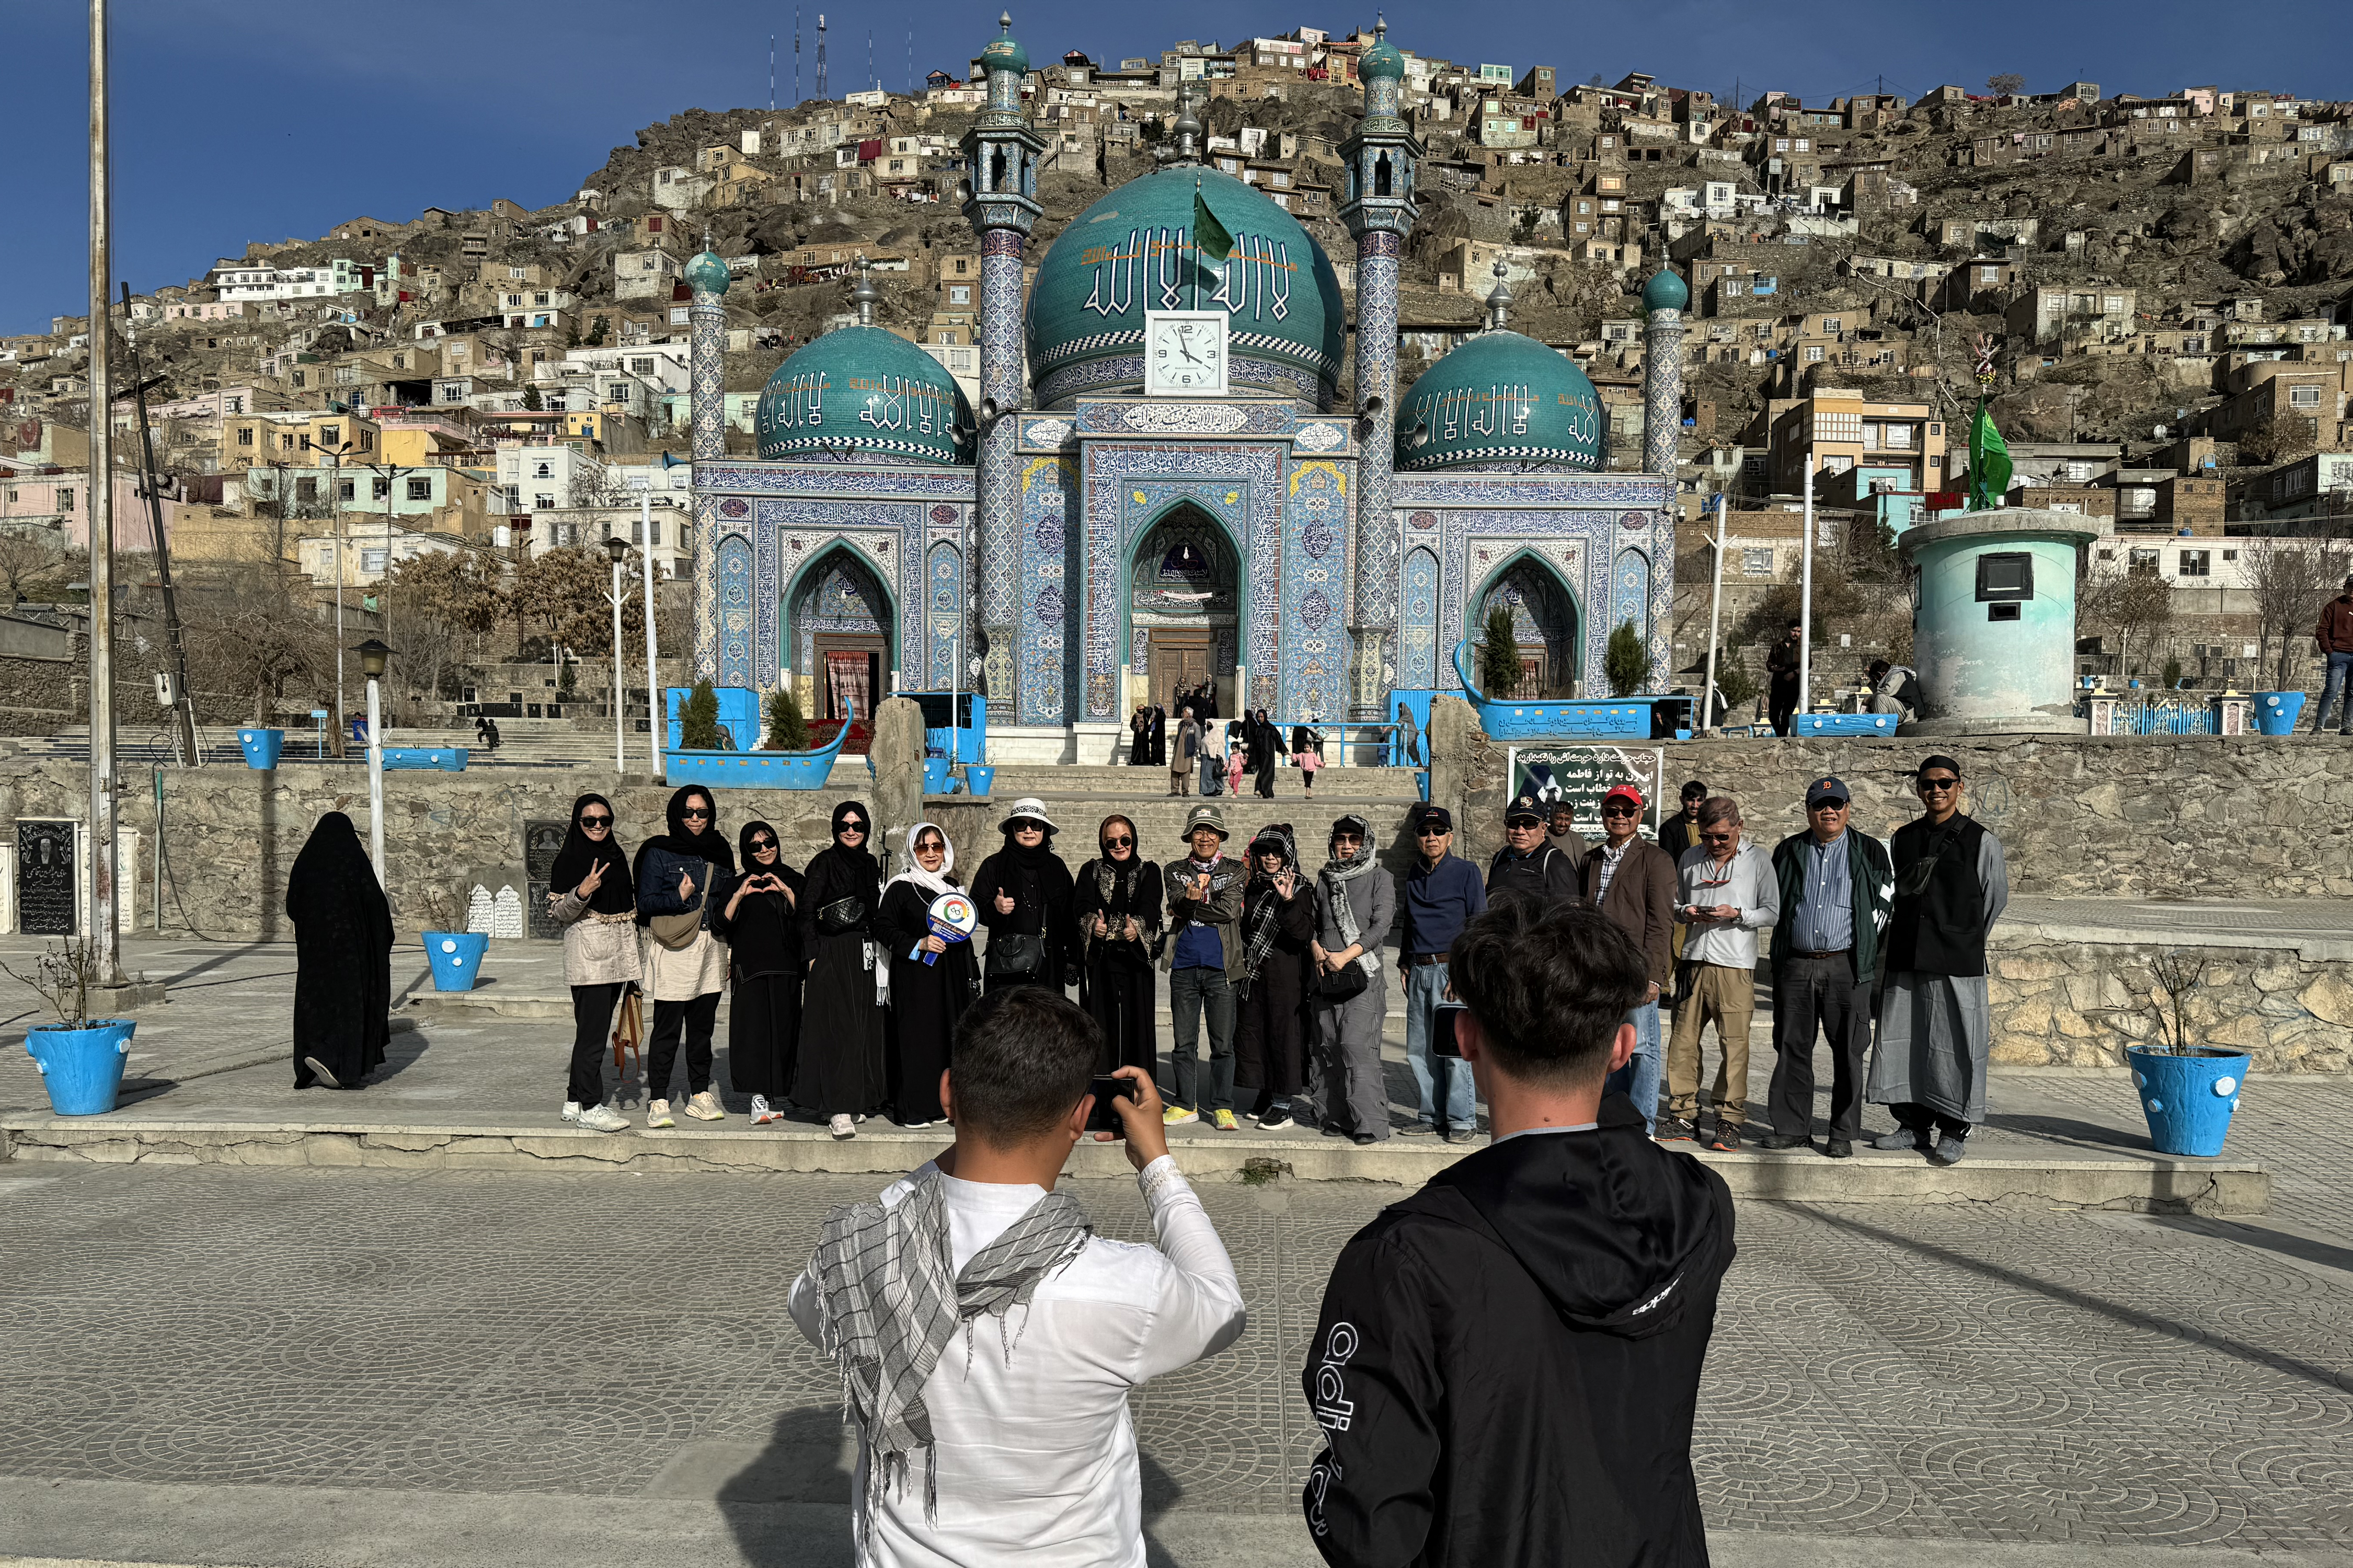 Taliban working to promote tourism in Afghanistan amid rise in foreign visitors